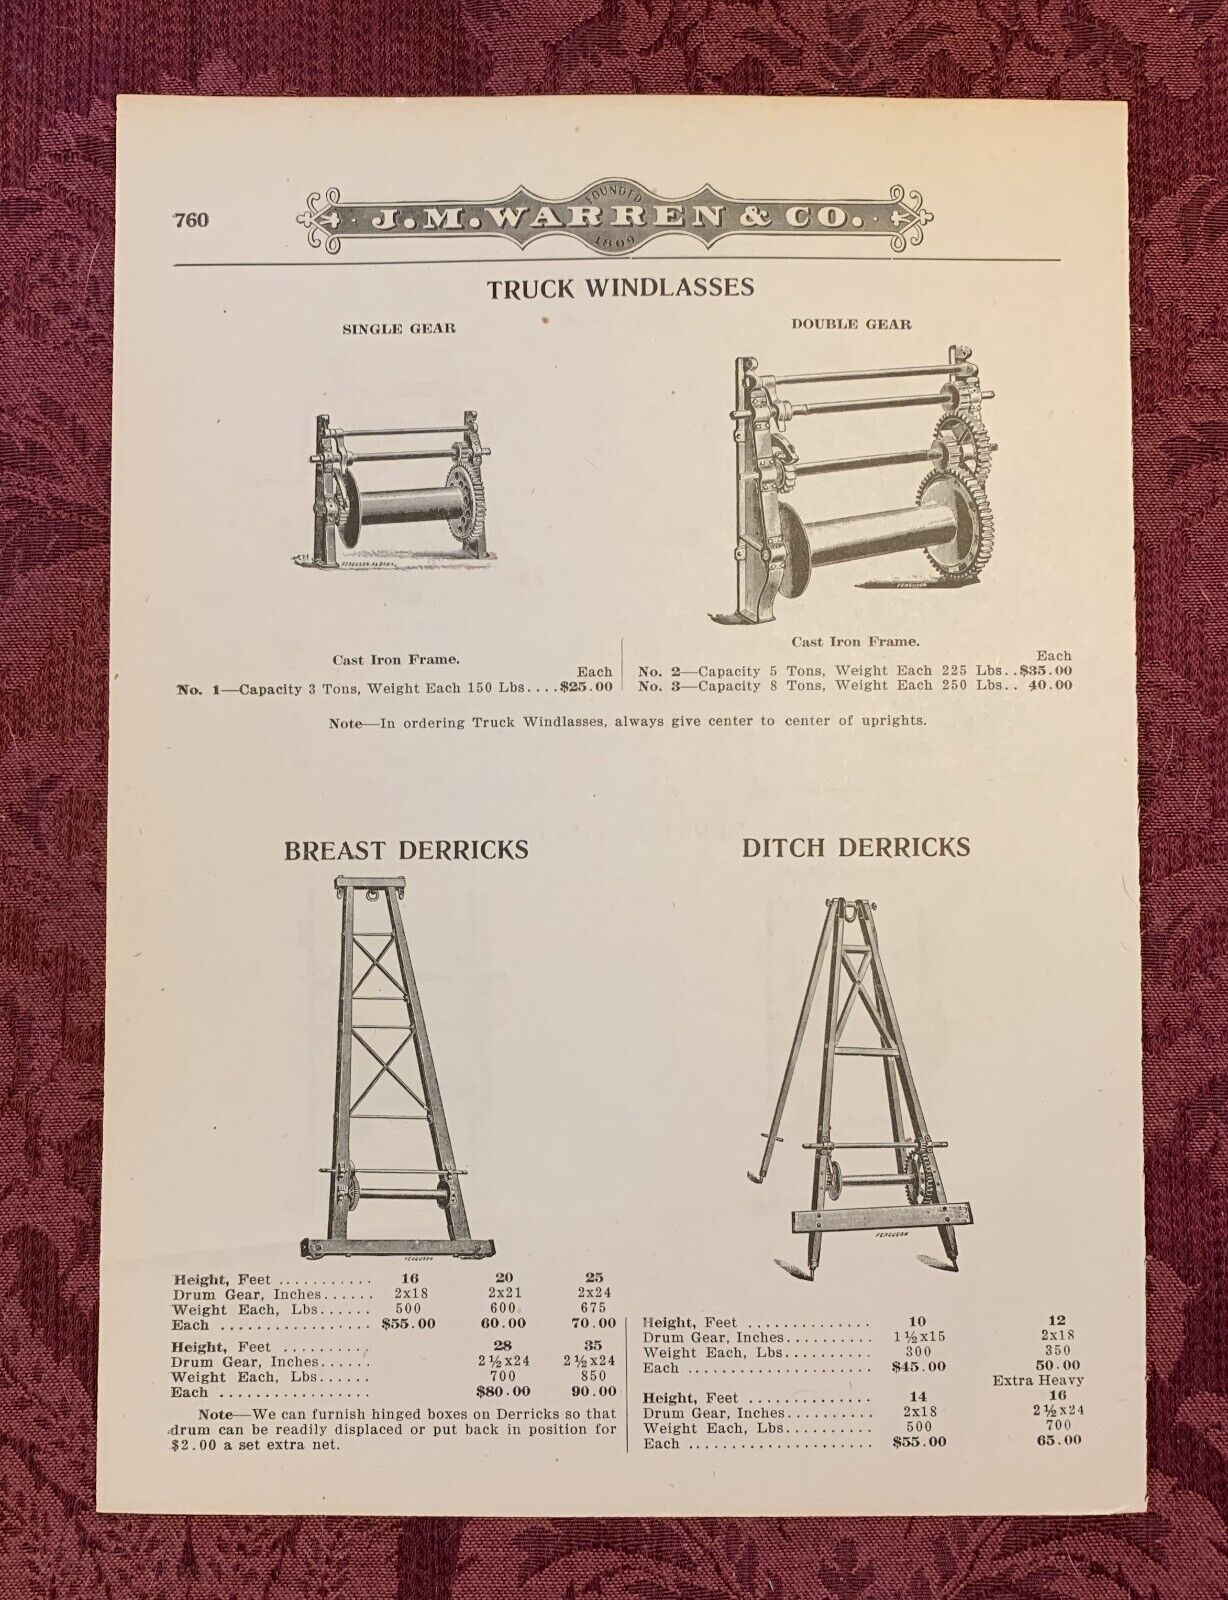 Vintage Farm/Tool/Hardware Catalog Pages-lot of 5-likely late 1800s-early1900s Без бренда - фотография #9